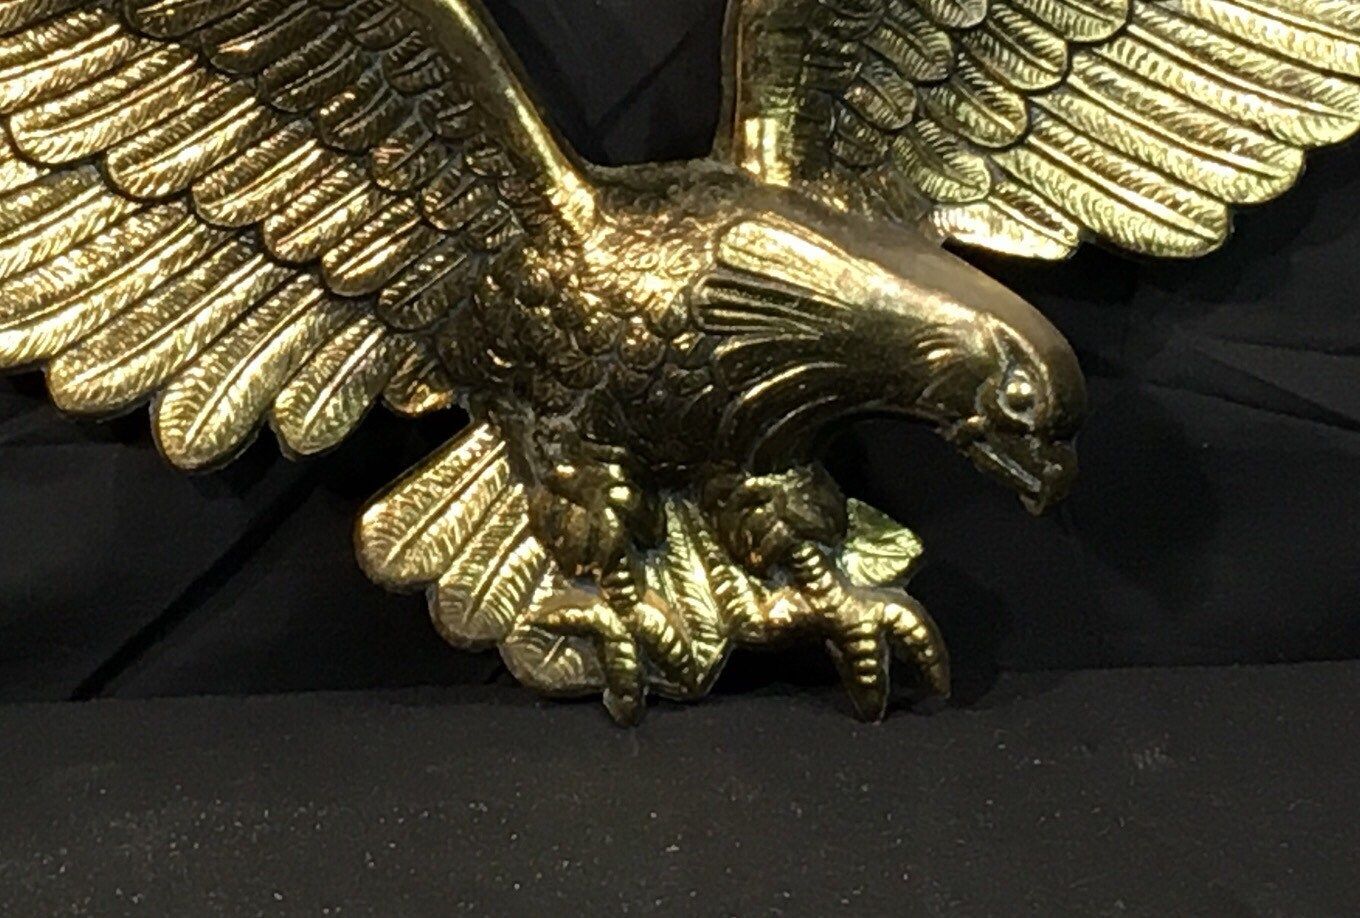 Vintage Brass Eagle, Decorative Gold Wall Decor, Wall Hanging Wildlife Within Newest Eagle Wall Art (View 2 of 20)